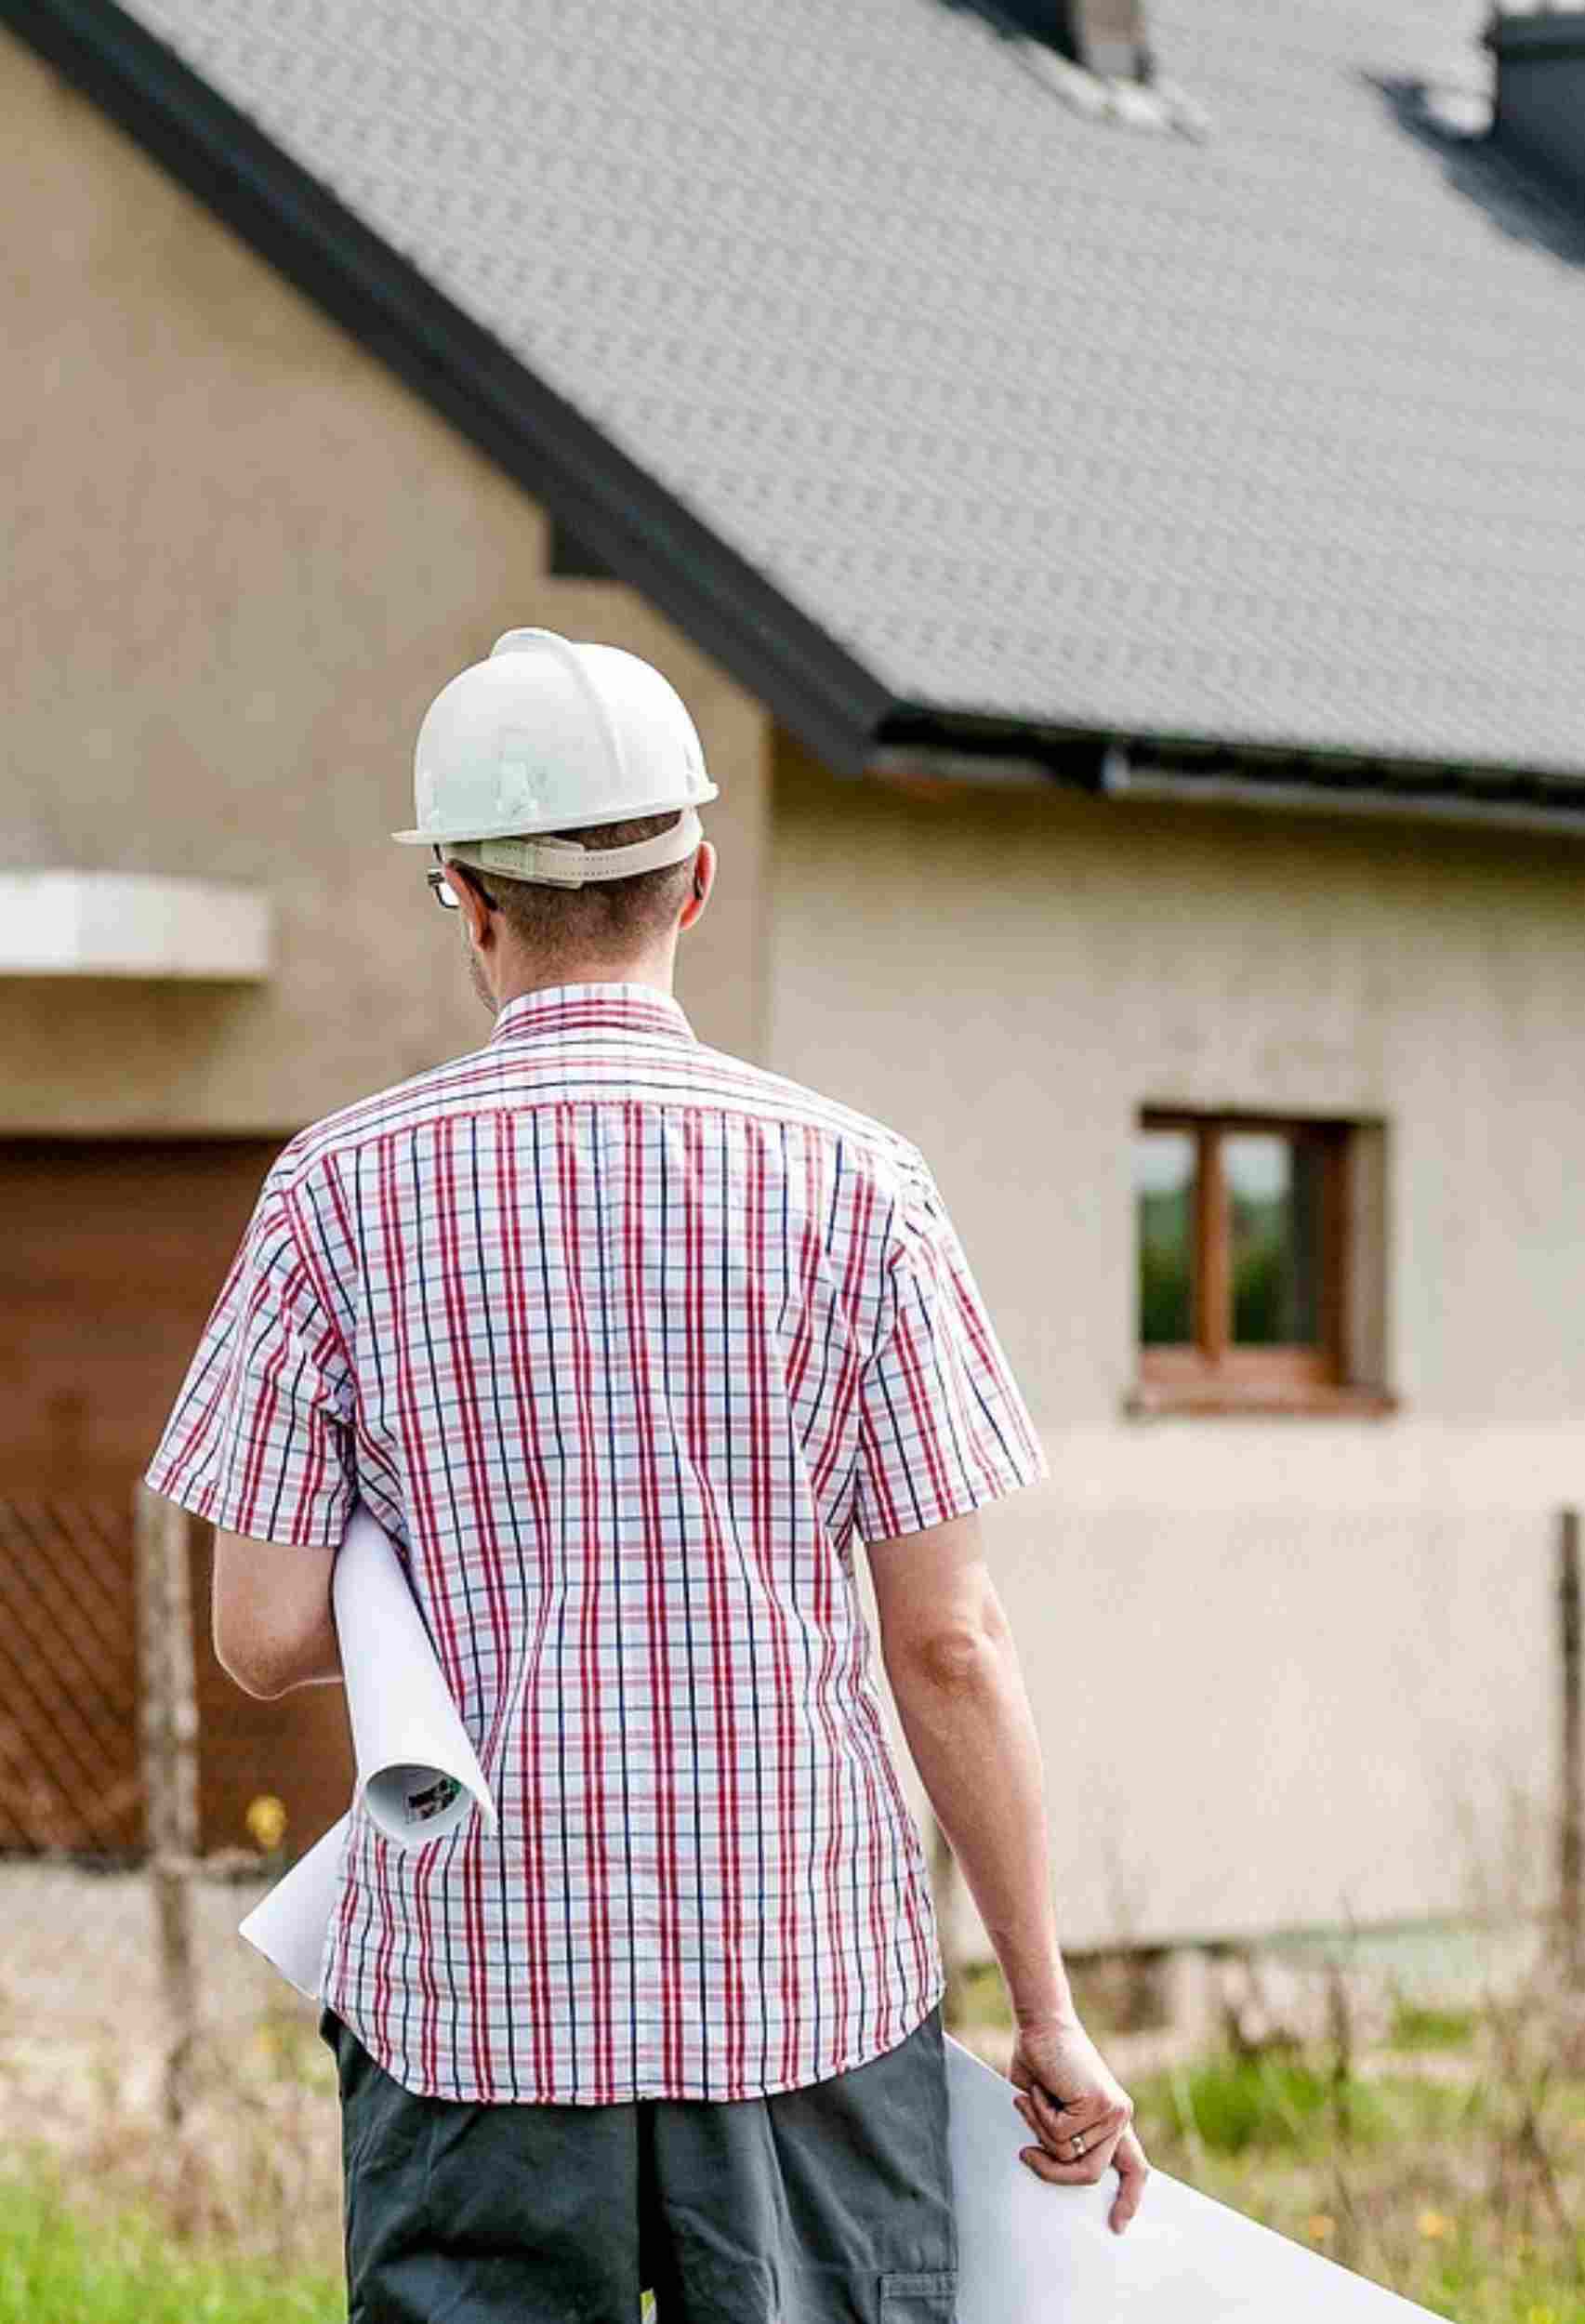 How to find an ideal contractor for your home renovation